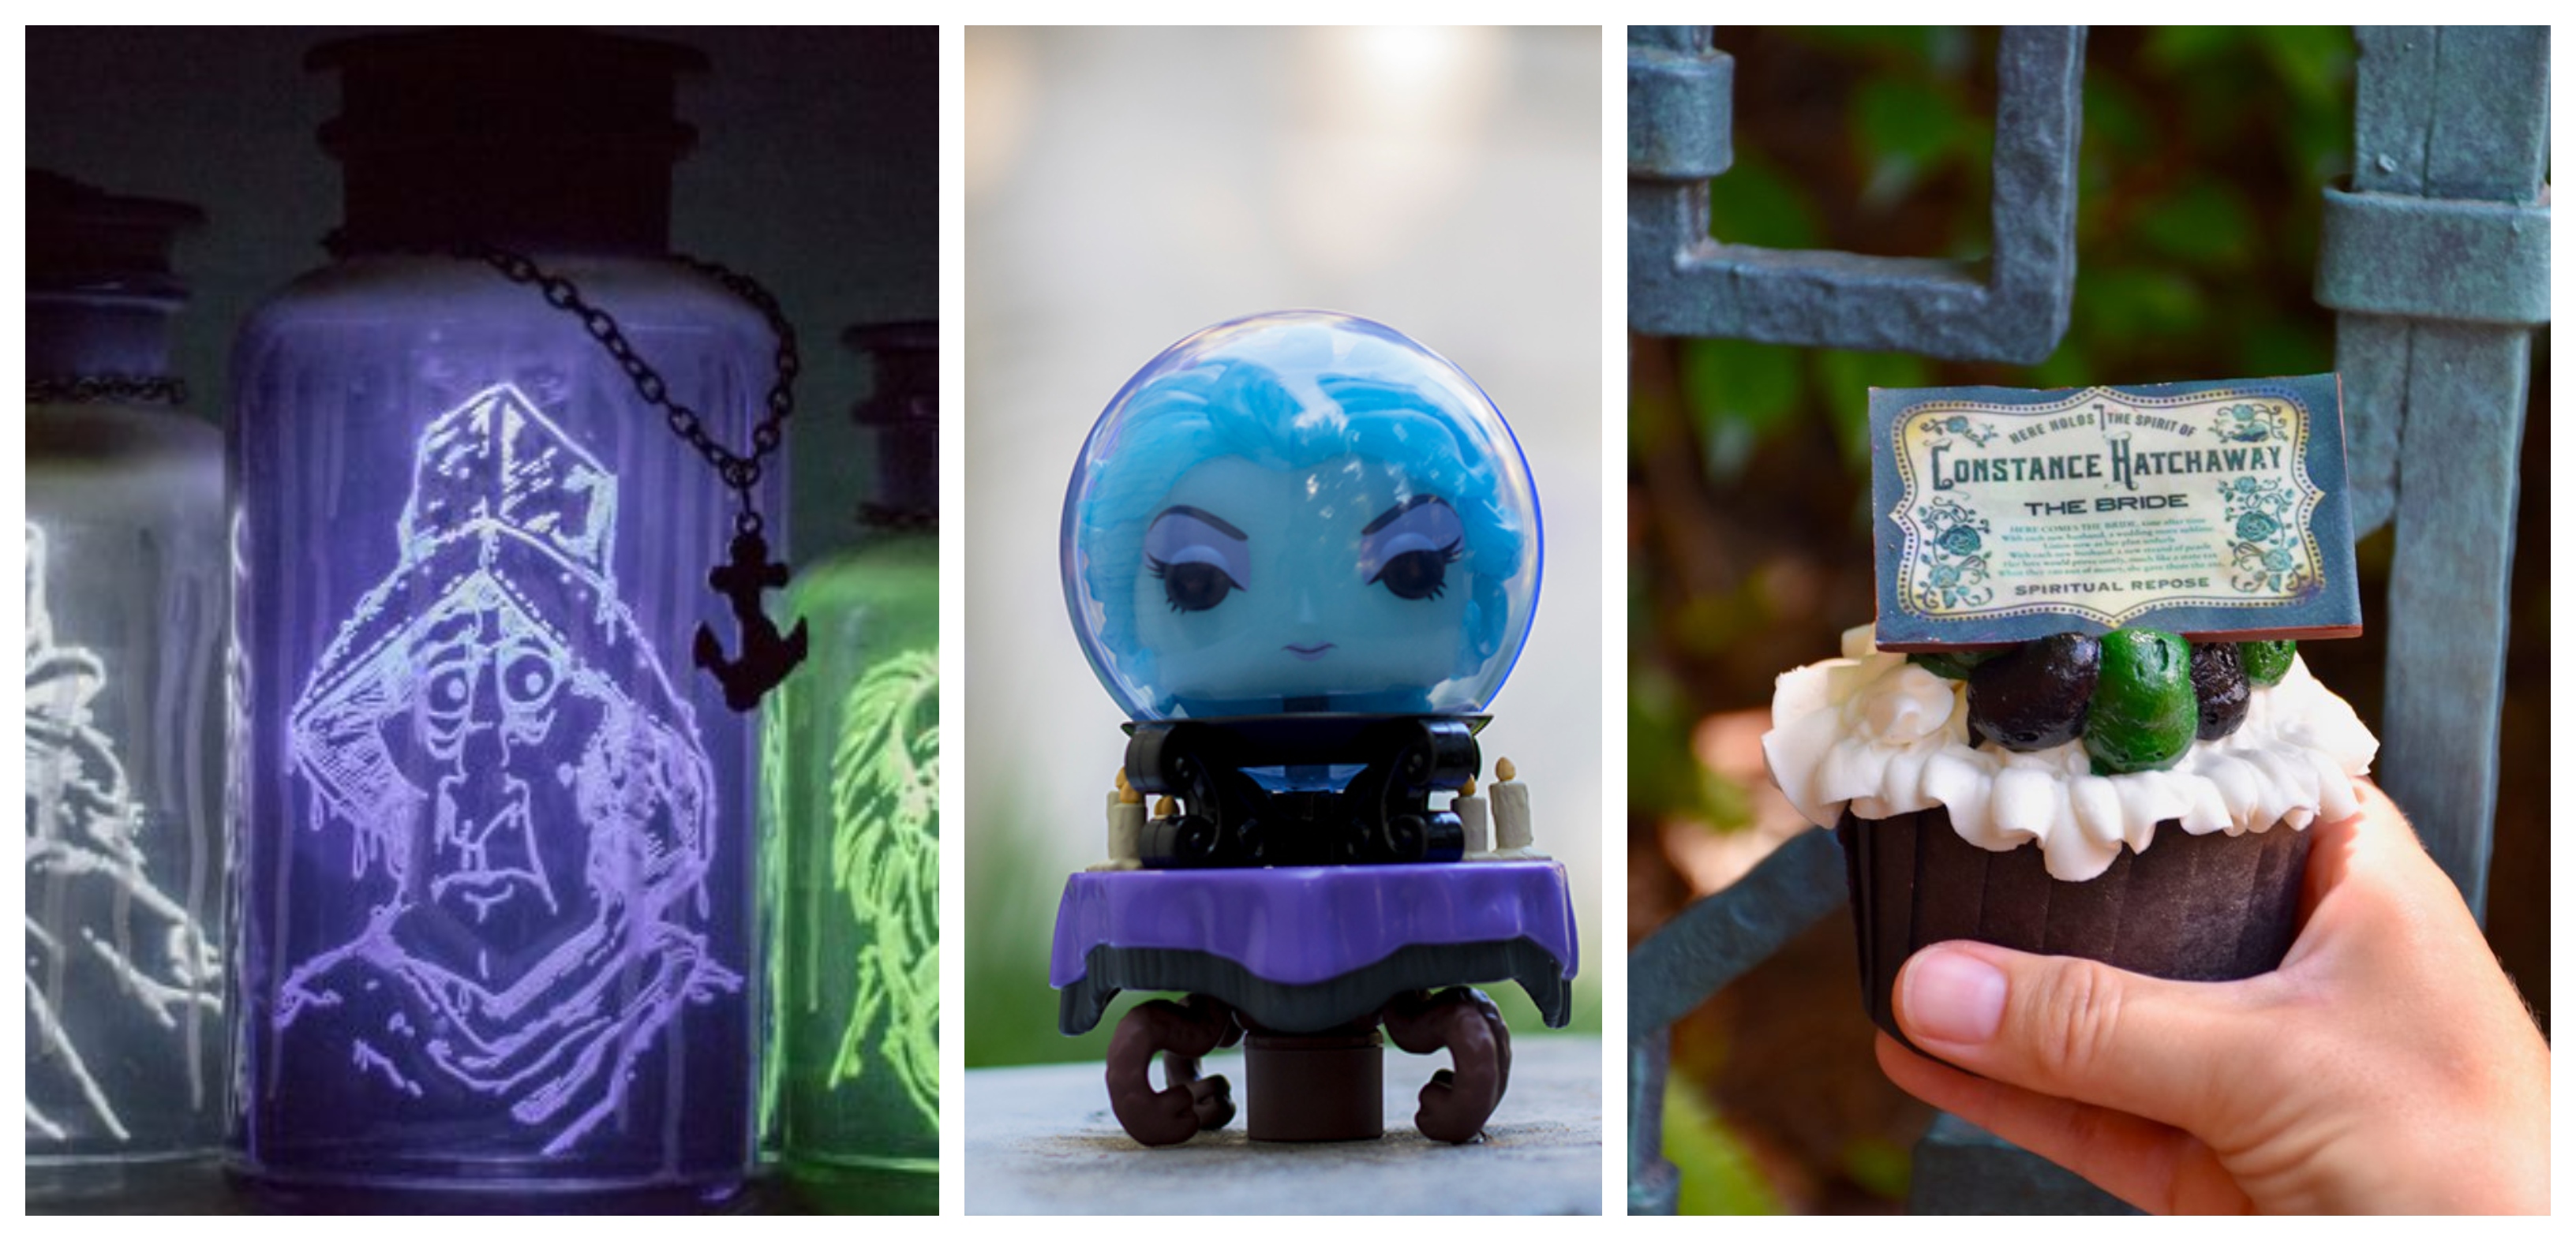 Celebrate the 50th Anniversary of the Haunted Mansion at Walt Disney World on August 9